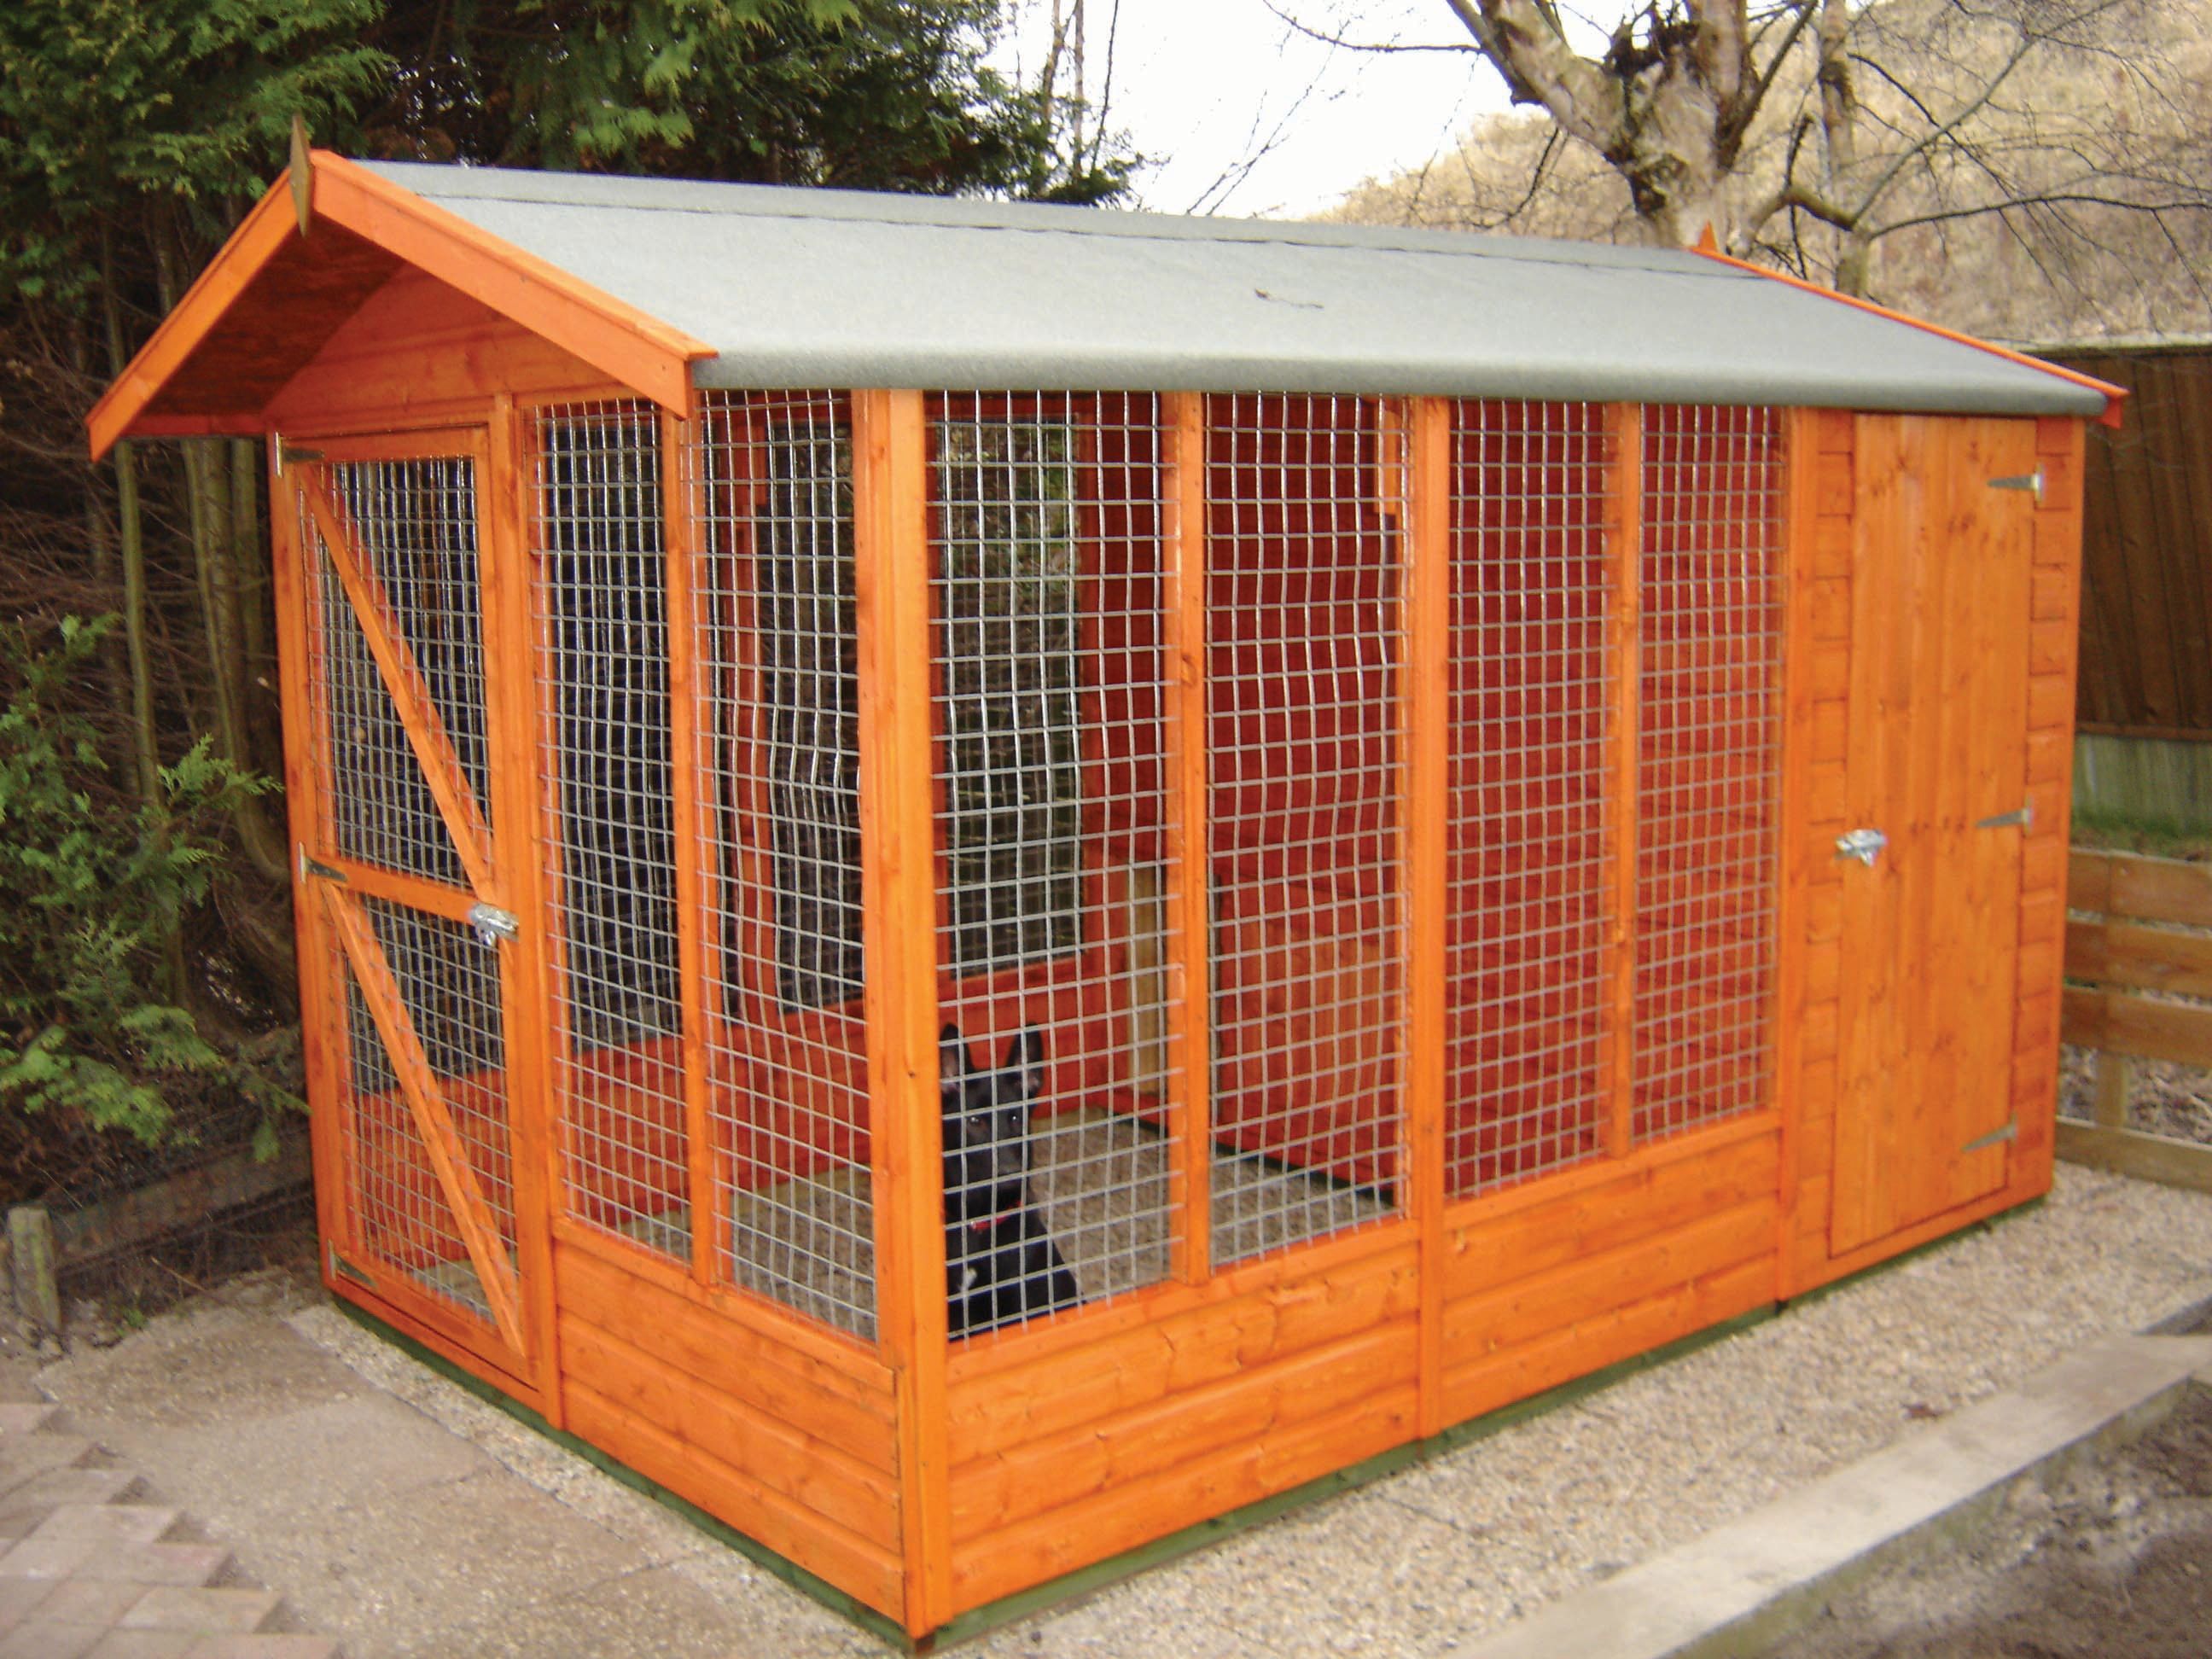 Shire Timber Apex Dog Kennel & Sheltered Run - 7 x 13 ft